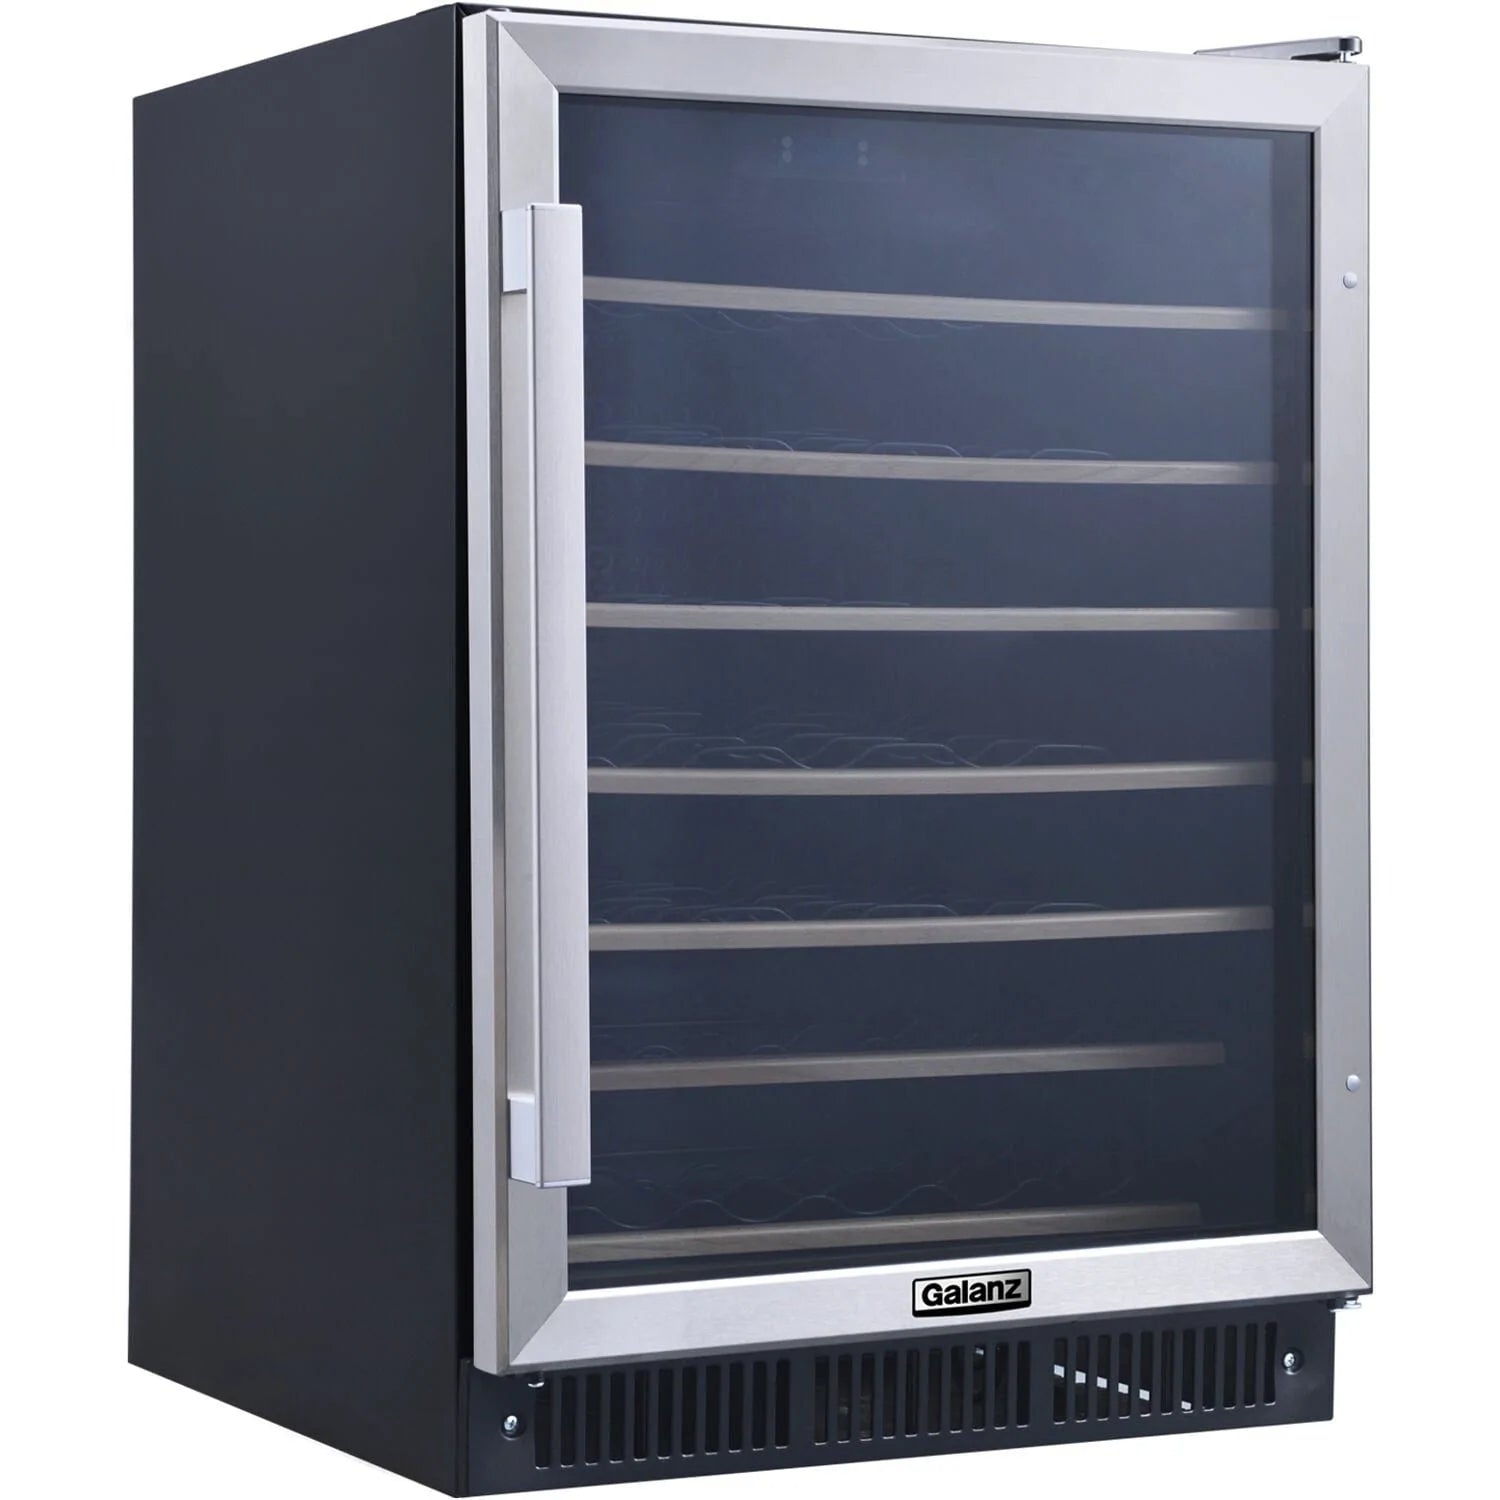 Galanz 47-Bottle Built-In Wine Cooler in Stainless Steel (GLW57MS2B16)